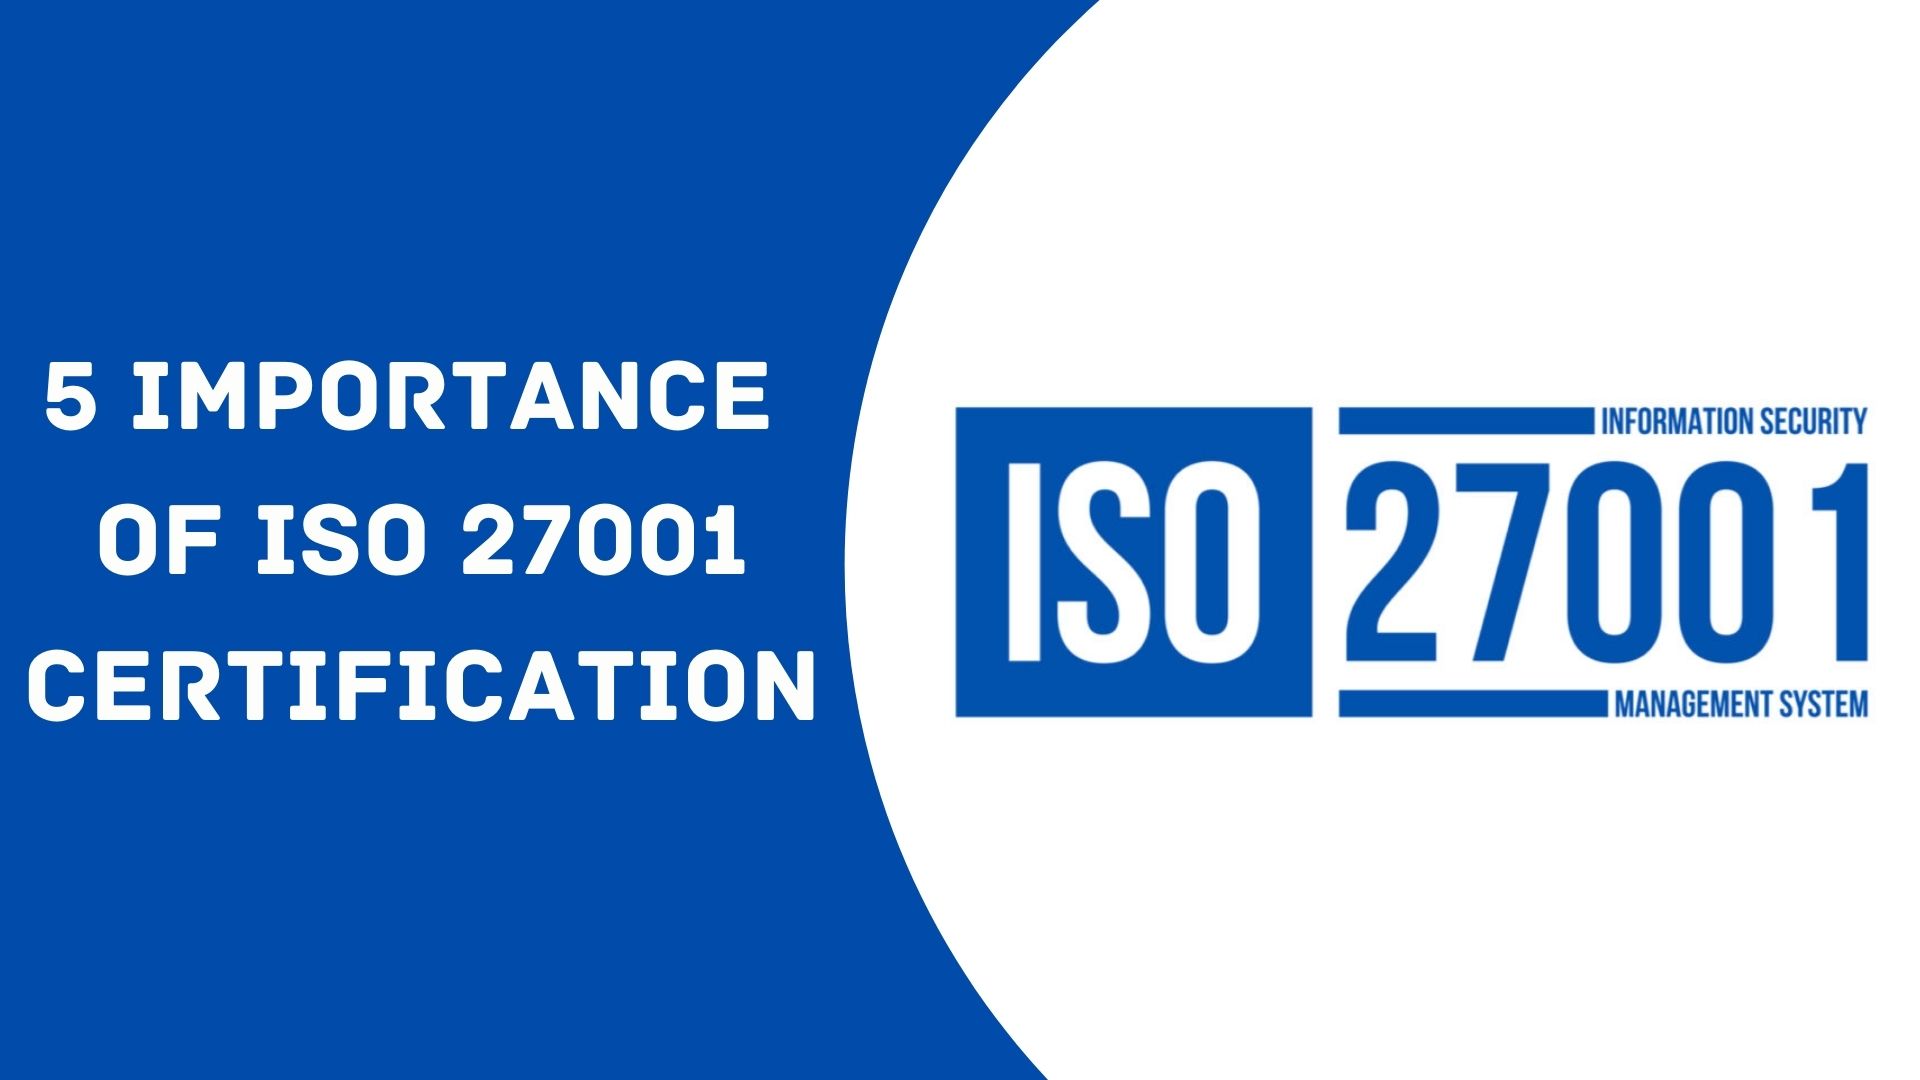 Top 5 significance of ISO 27001 certification